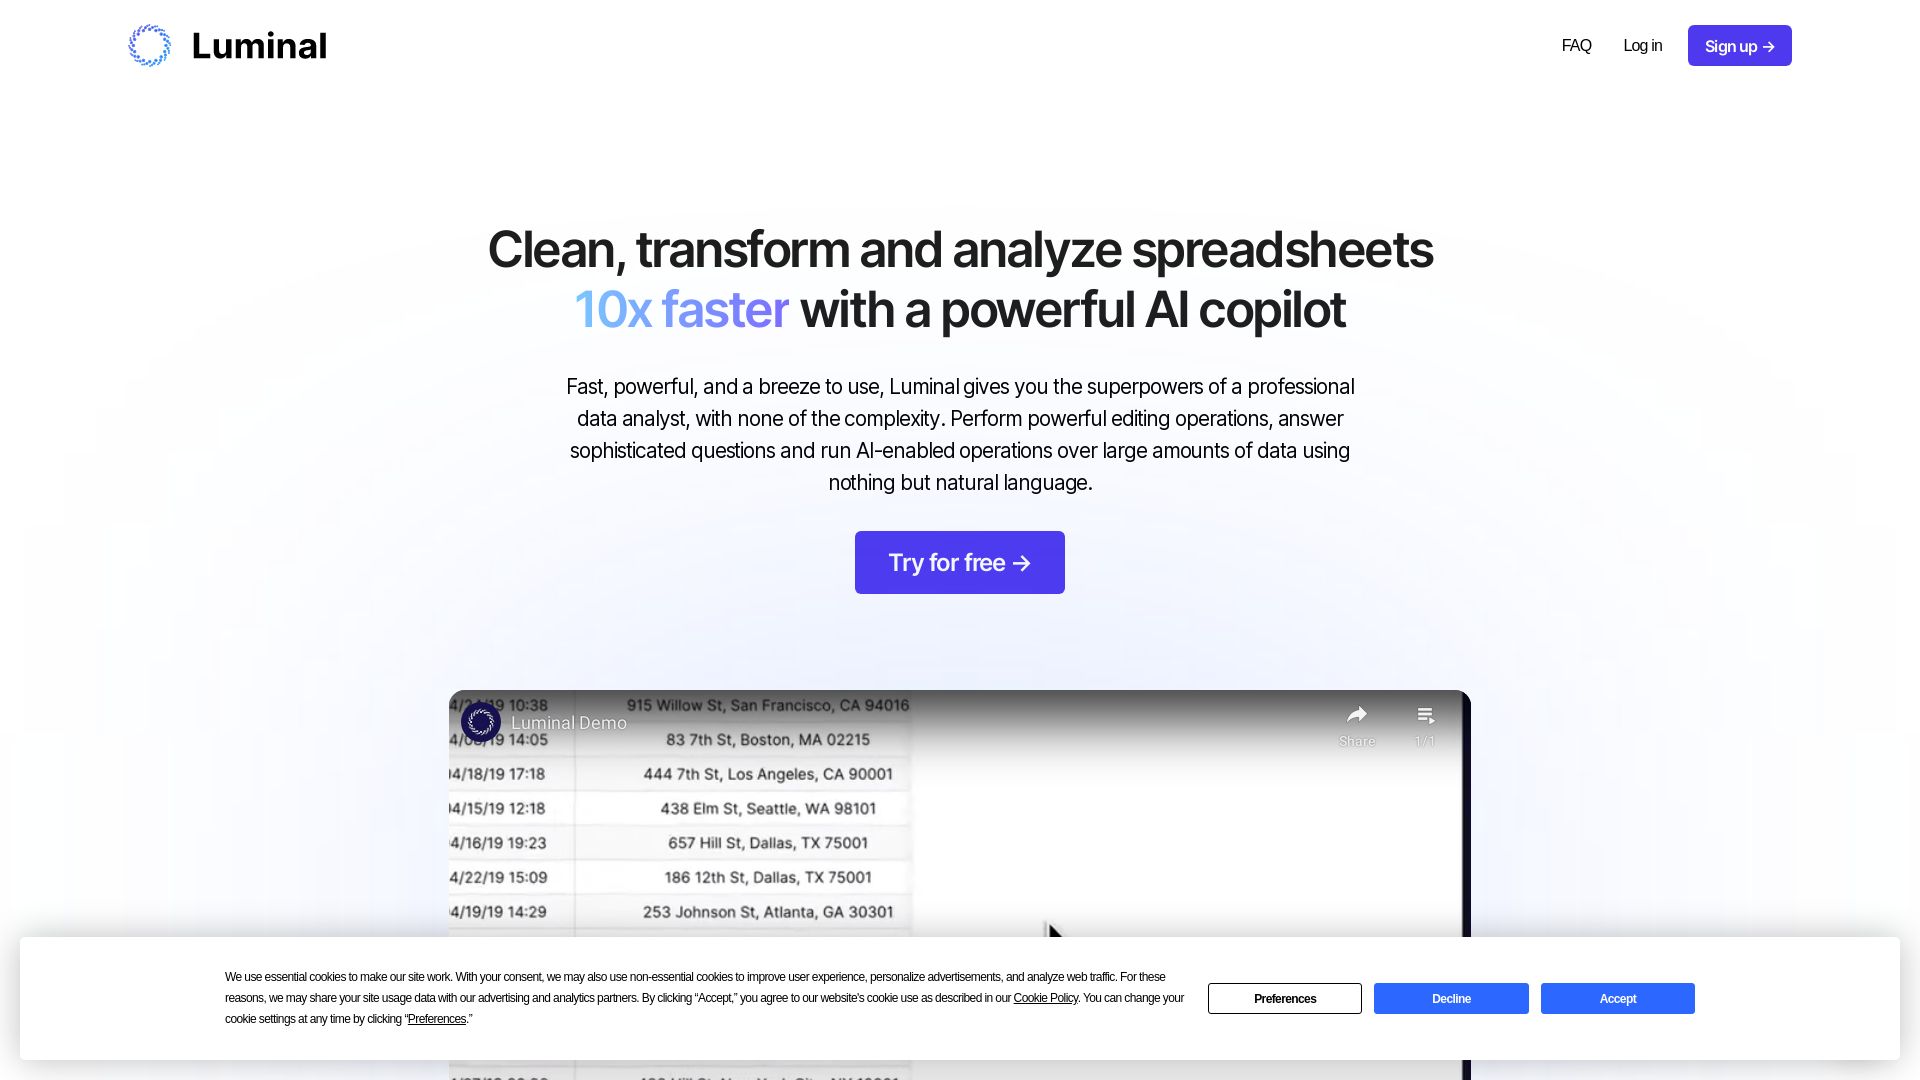 Luminal: Clean, transform and analyze spreadsheets 10x faster with a powerful AI copilot.